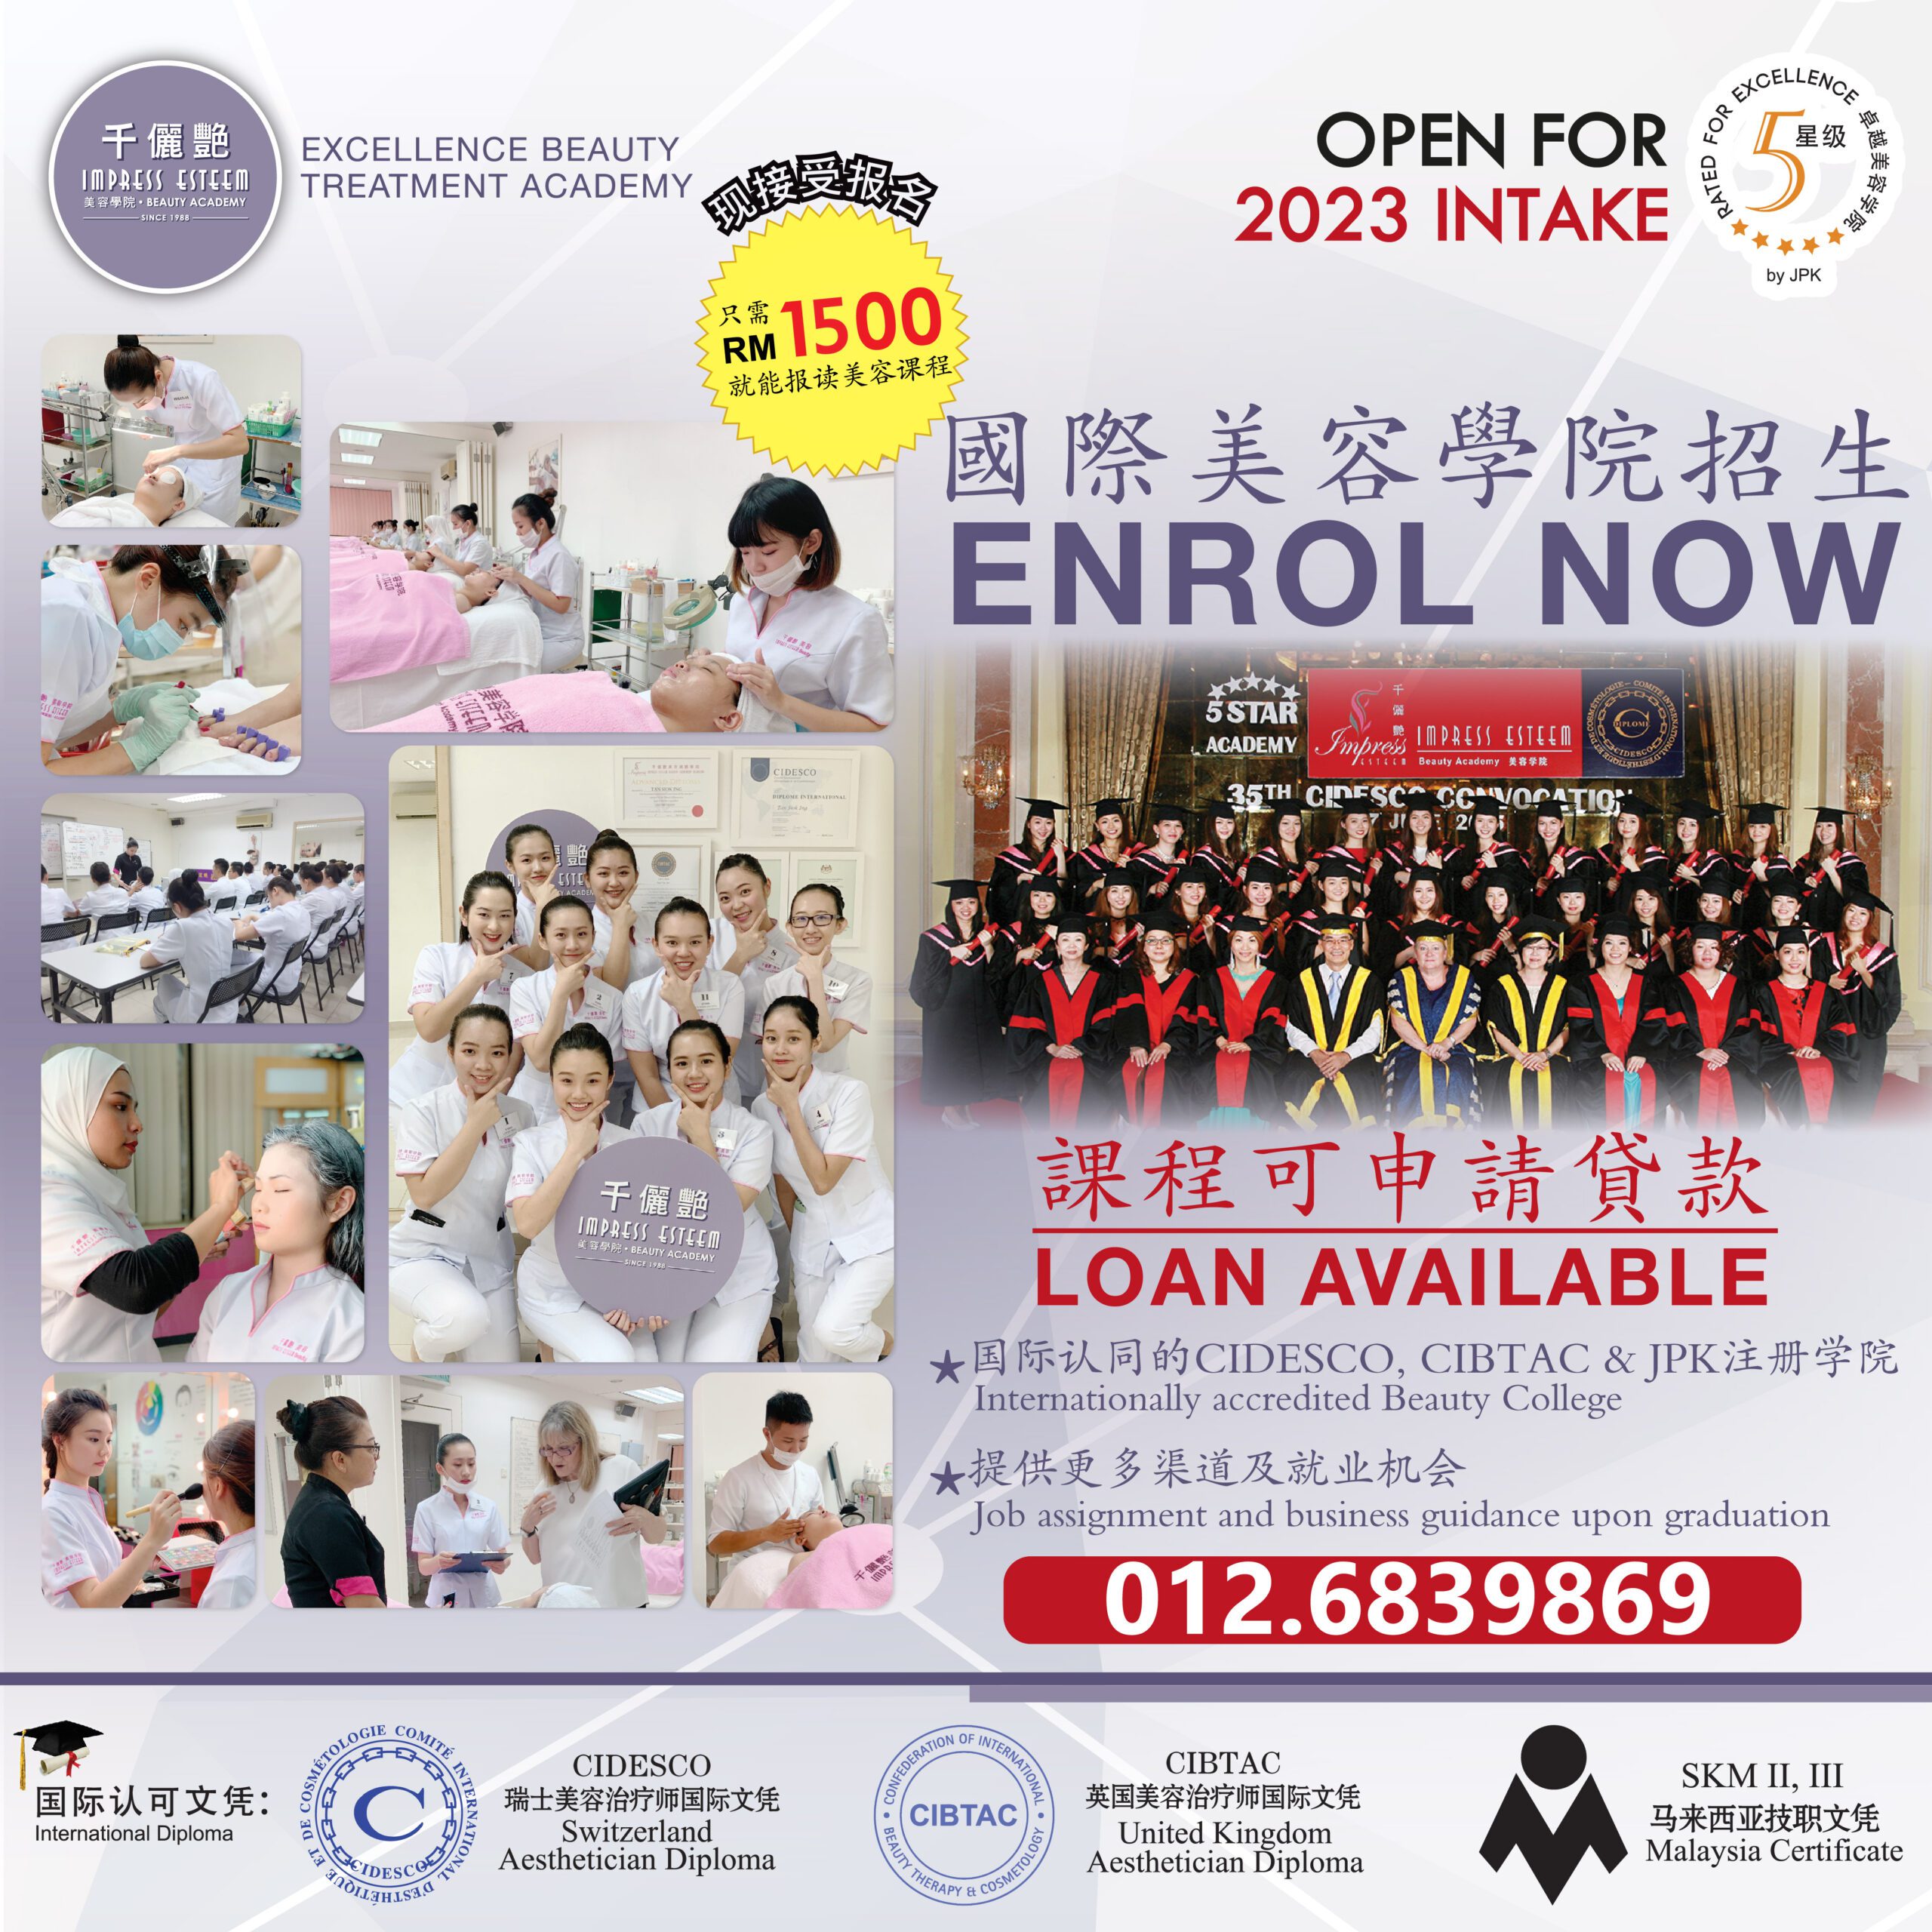 Enrollment in the 2023 International Cosmetology Academy Course is now begin! 2023年国际美容精英课程招生正式开始!